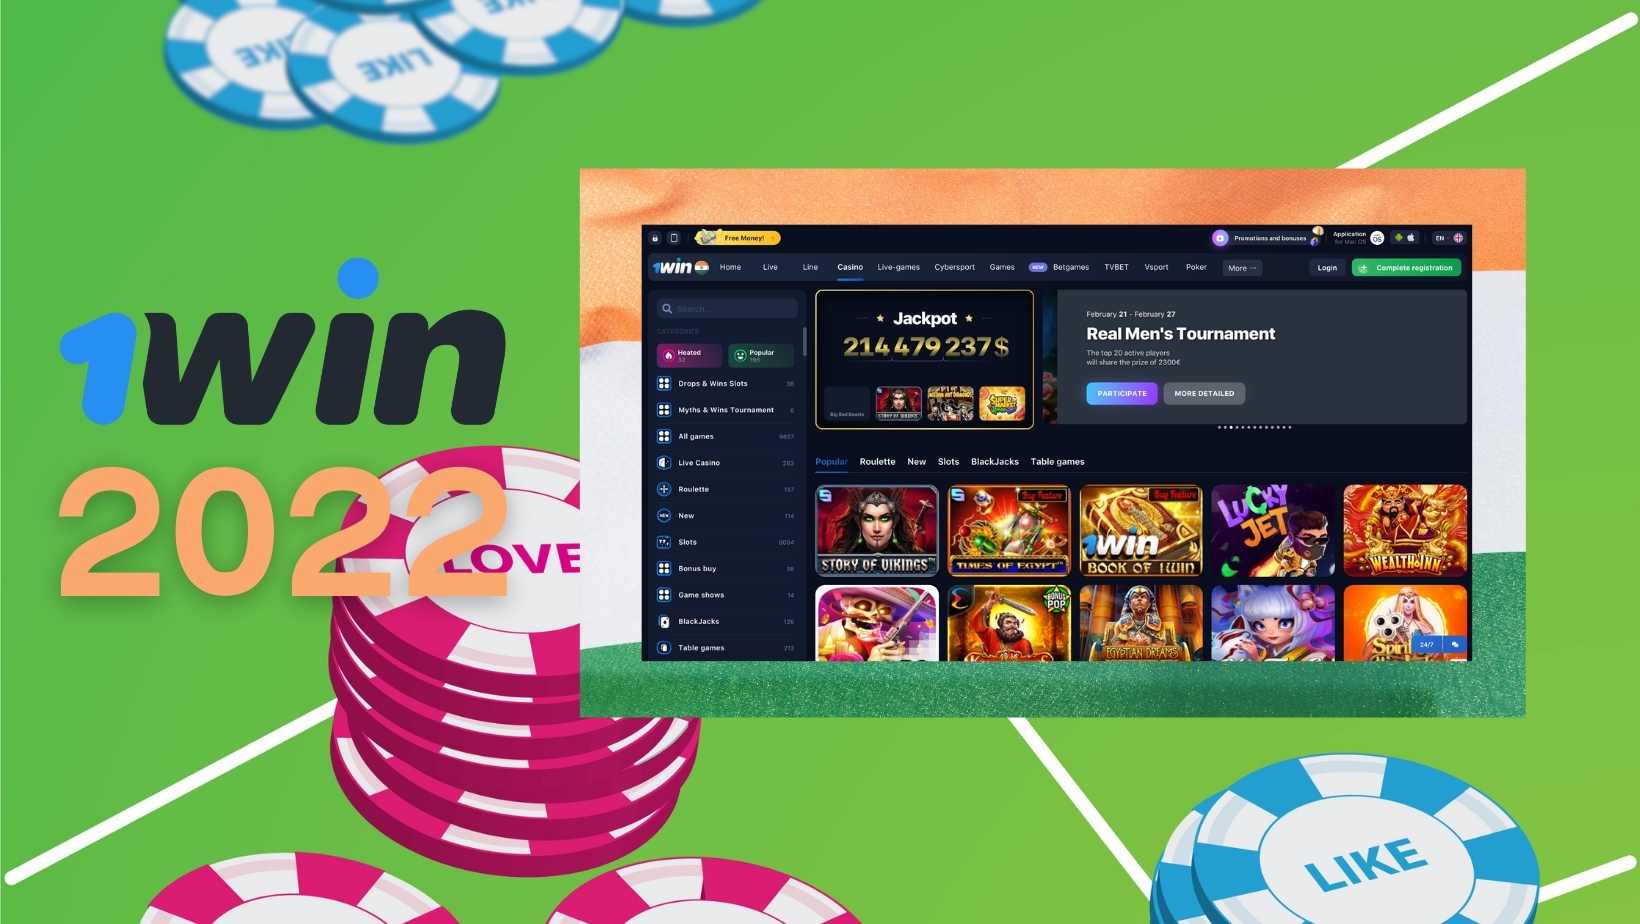 Casino overview of 1Win site in India 2022